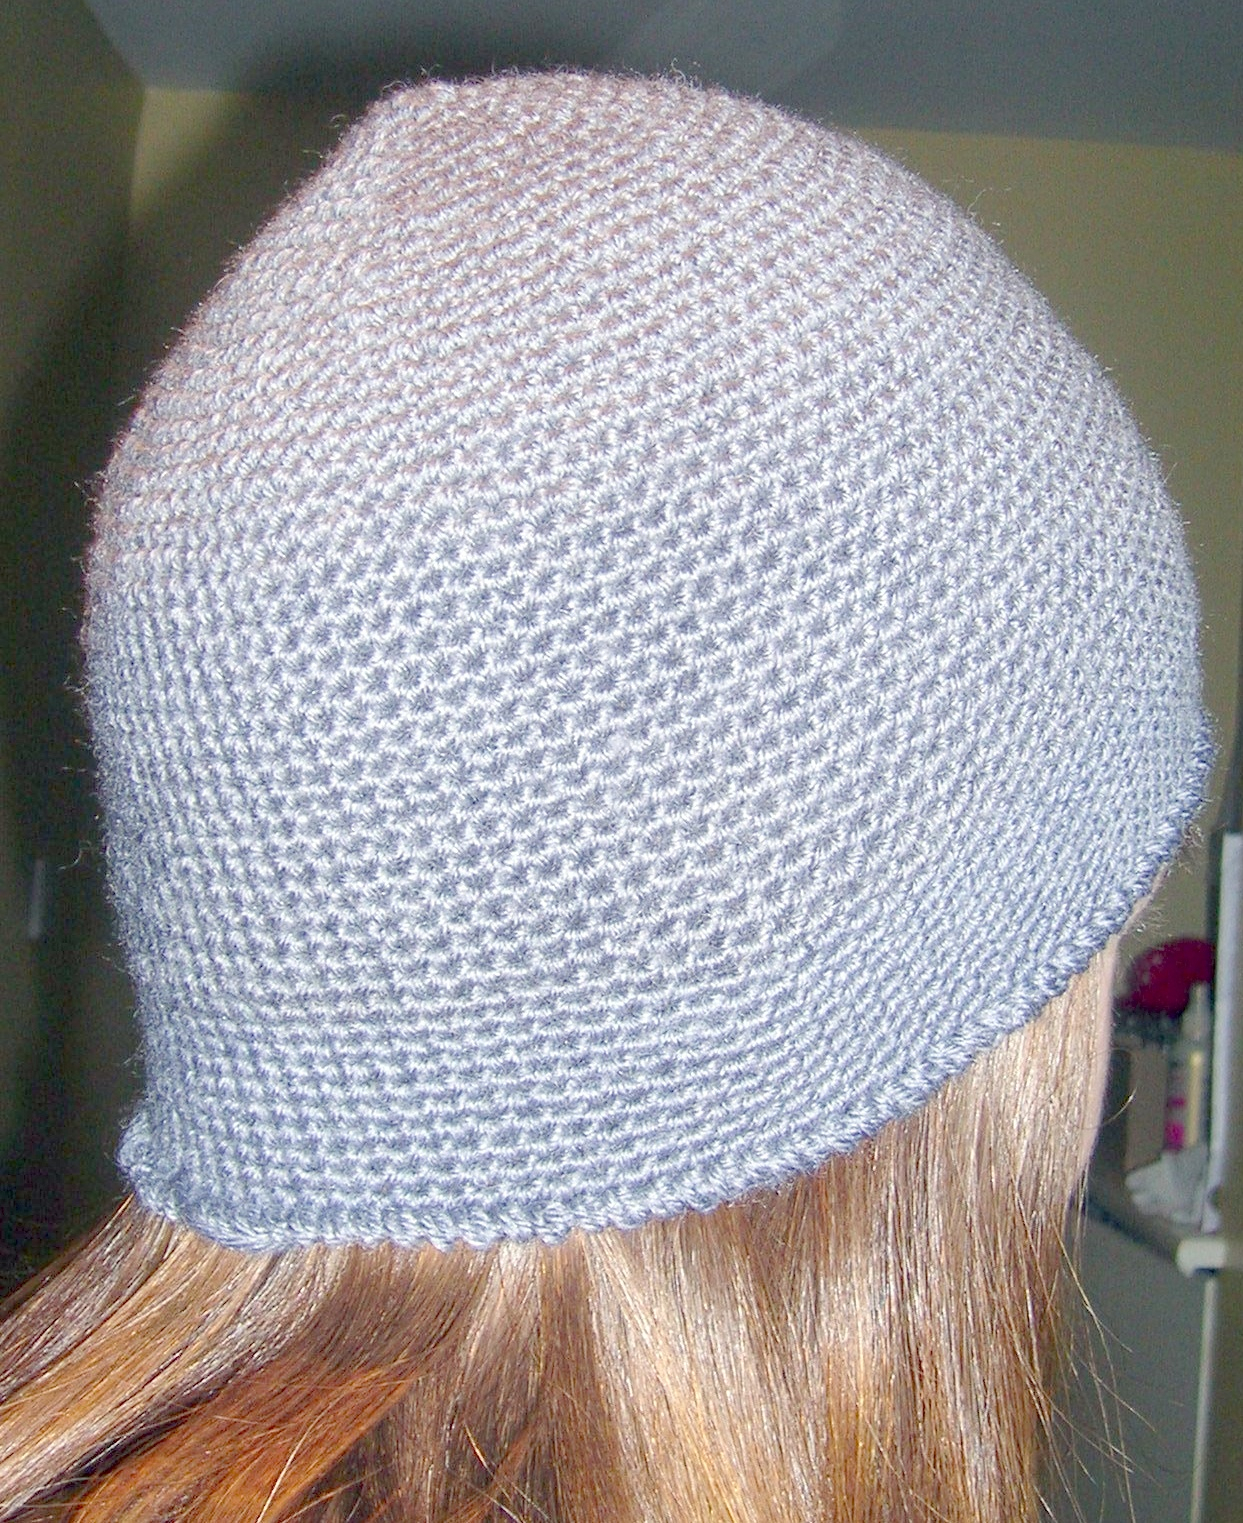 Single Crochet Beanie Pattern Free Increasing Crochet In The Round For Rugs Hats And Other Lovely